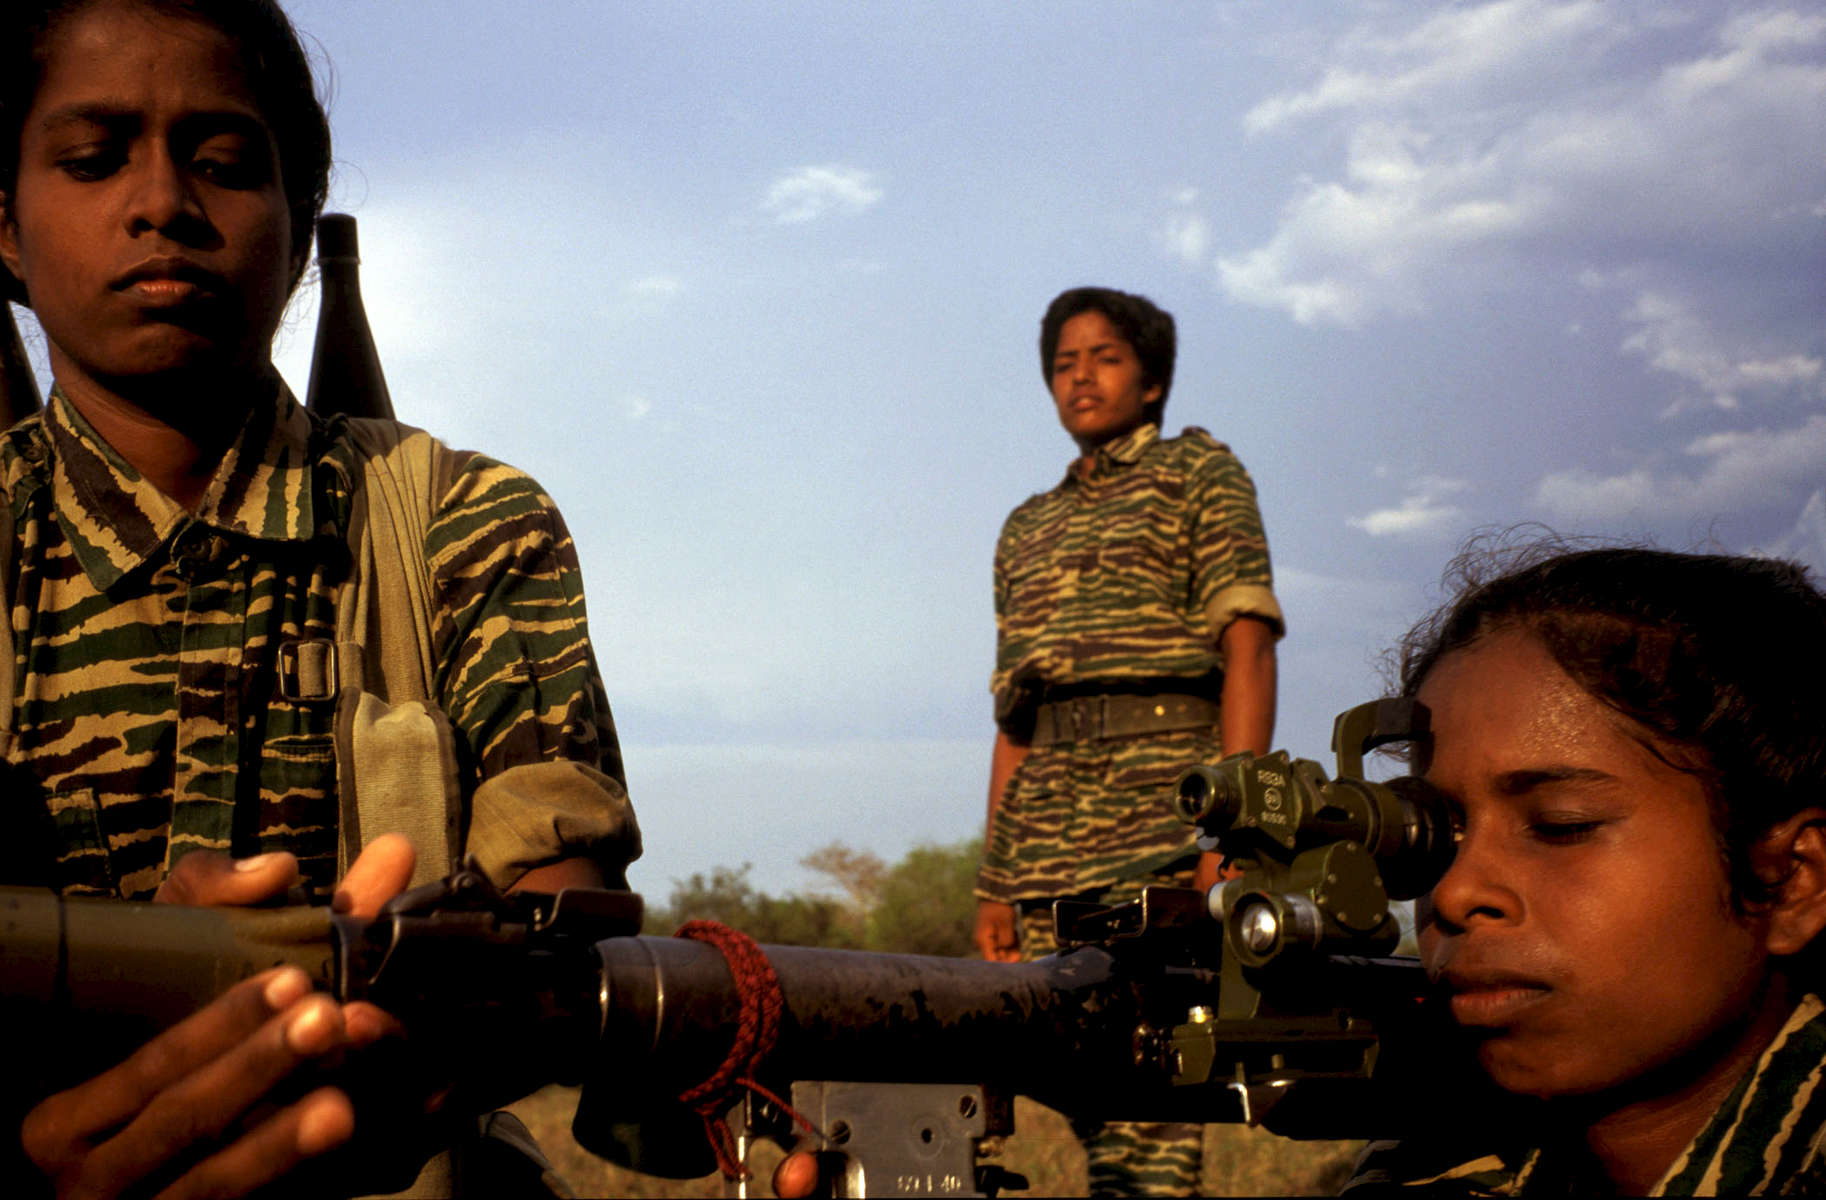 Female Tamil Tiger fighters during heavy weaponry training in the northern Vanni region of Sri Lanka. During a 6 month training period, the initial 3 months serve as an endurance testing ground beginning at 4:30 am until late evening. The training consists of long distance running, crawling under barbed wires, rope climbing, military parades coupled with theoretical and practical exercise with weapons, sentry posts staffed 24 hours, maintenance of the camp as well as political and military studies. The folowing 3 months is advanced military training with heavy weaponry and live ammunition - to familiarise both sound and impact.  Special training continues into areas of need, interest, and expertise in order to handle communication equipment, explosives, mining, weapon technology, electronics, field medecine, political work and intelligence/reconnaissance work. The women who show an aptitude for combat situations progress further to specialised commando training. 1998